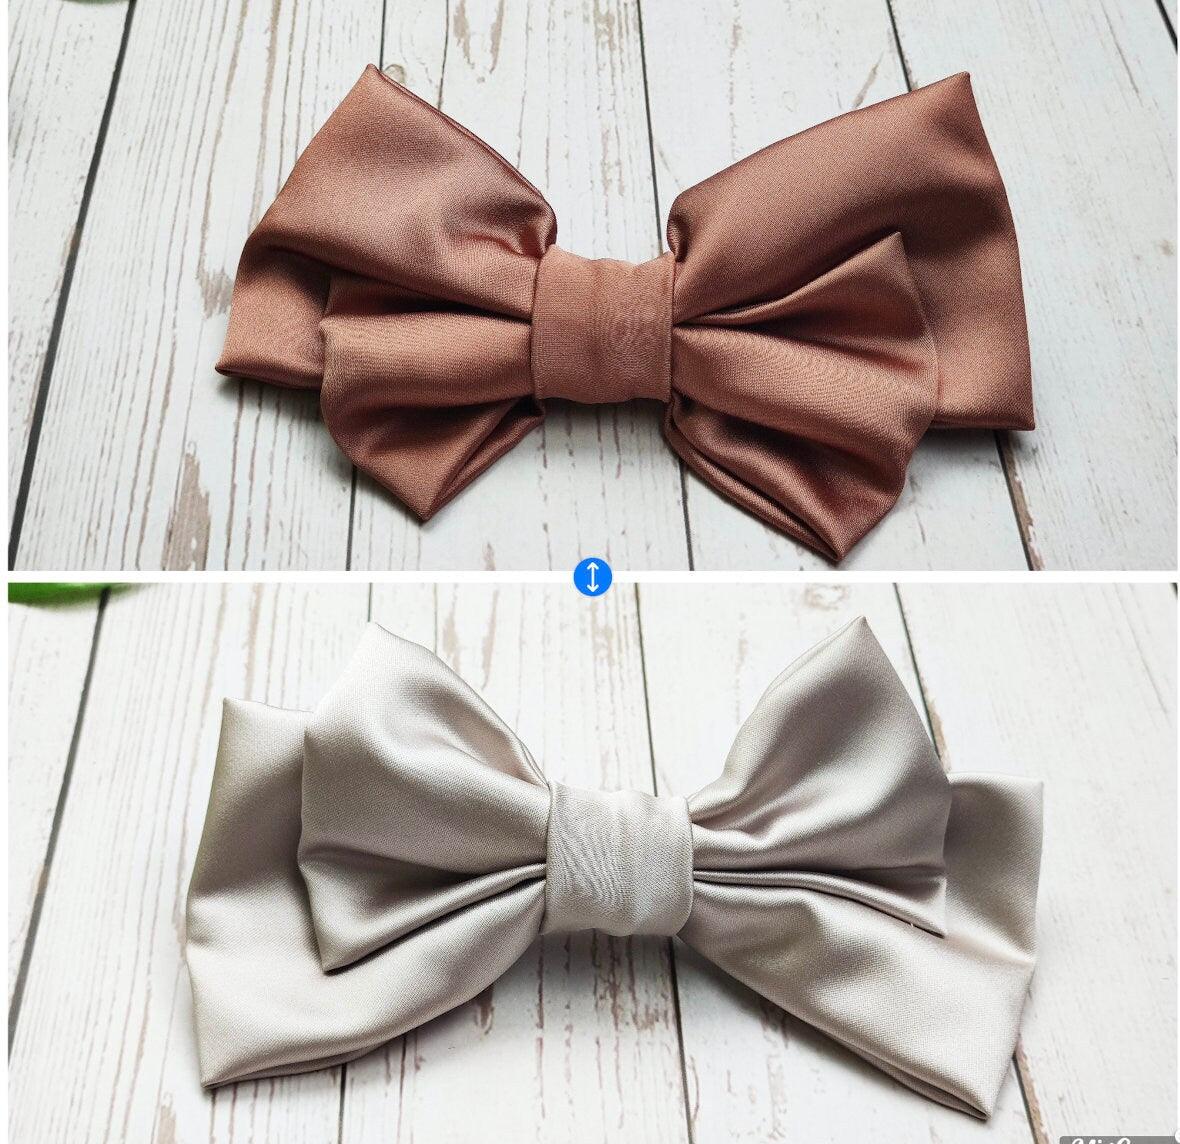 Stylish Handmade Satin Hair Clips with Bow - Brick Color Hairpins, Fashionable Hair Accessory and Bow Clasp available at Moyoni Design